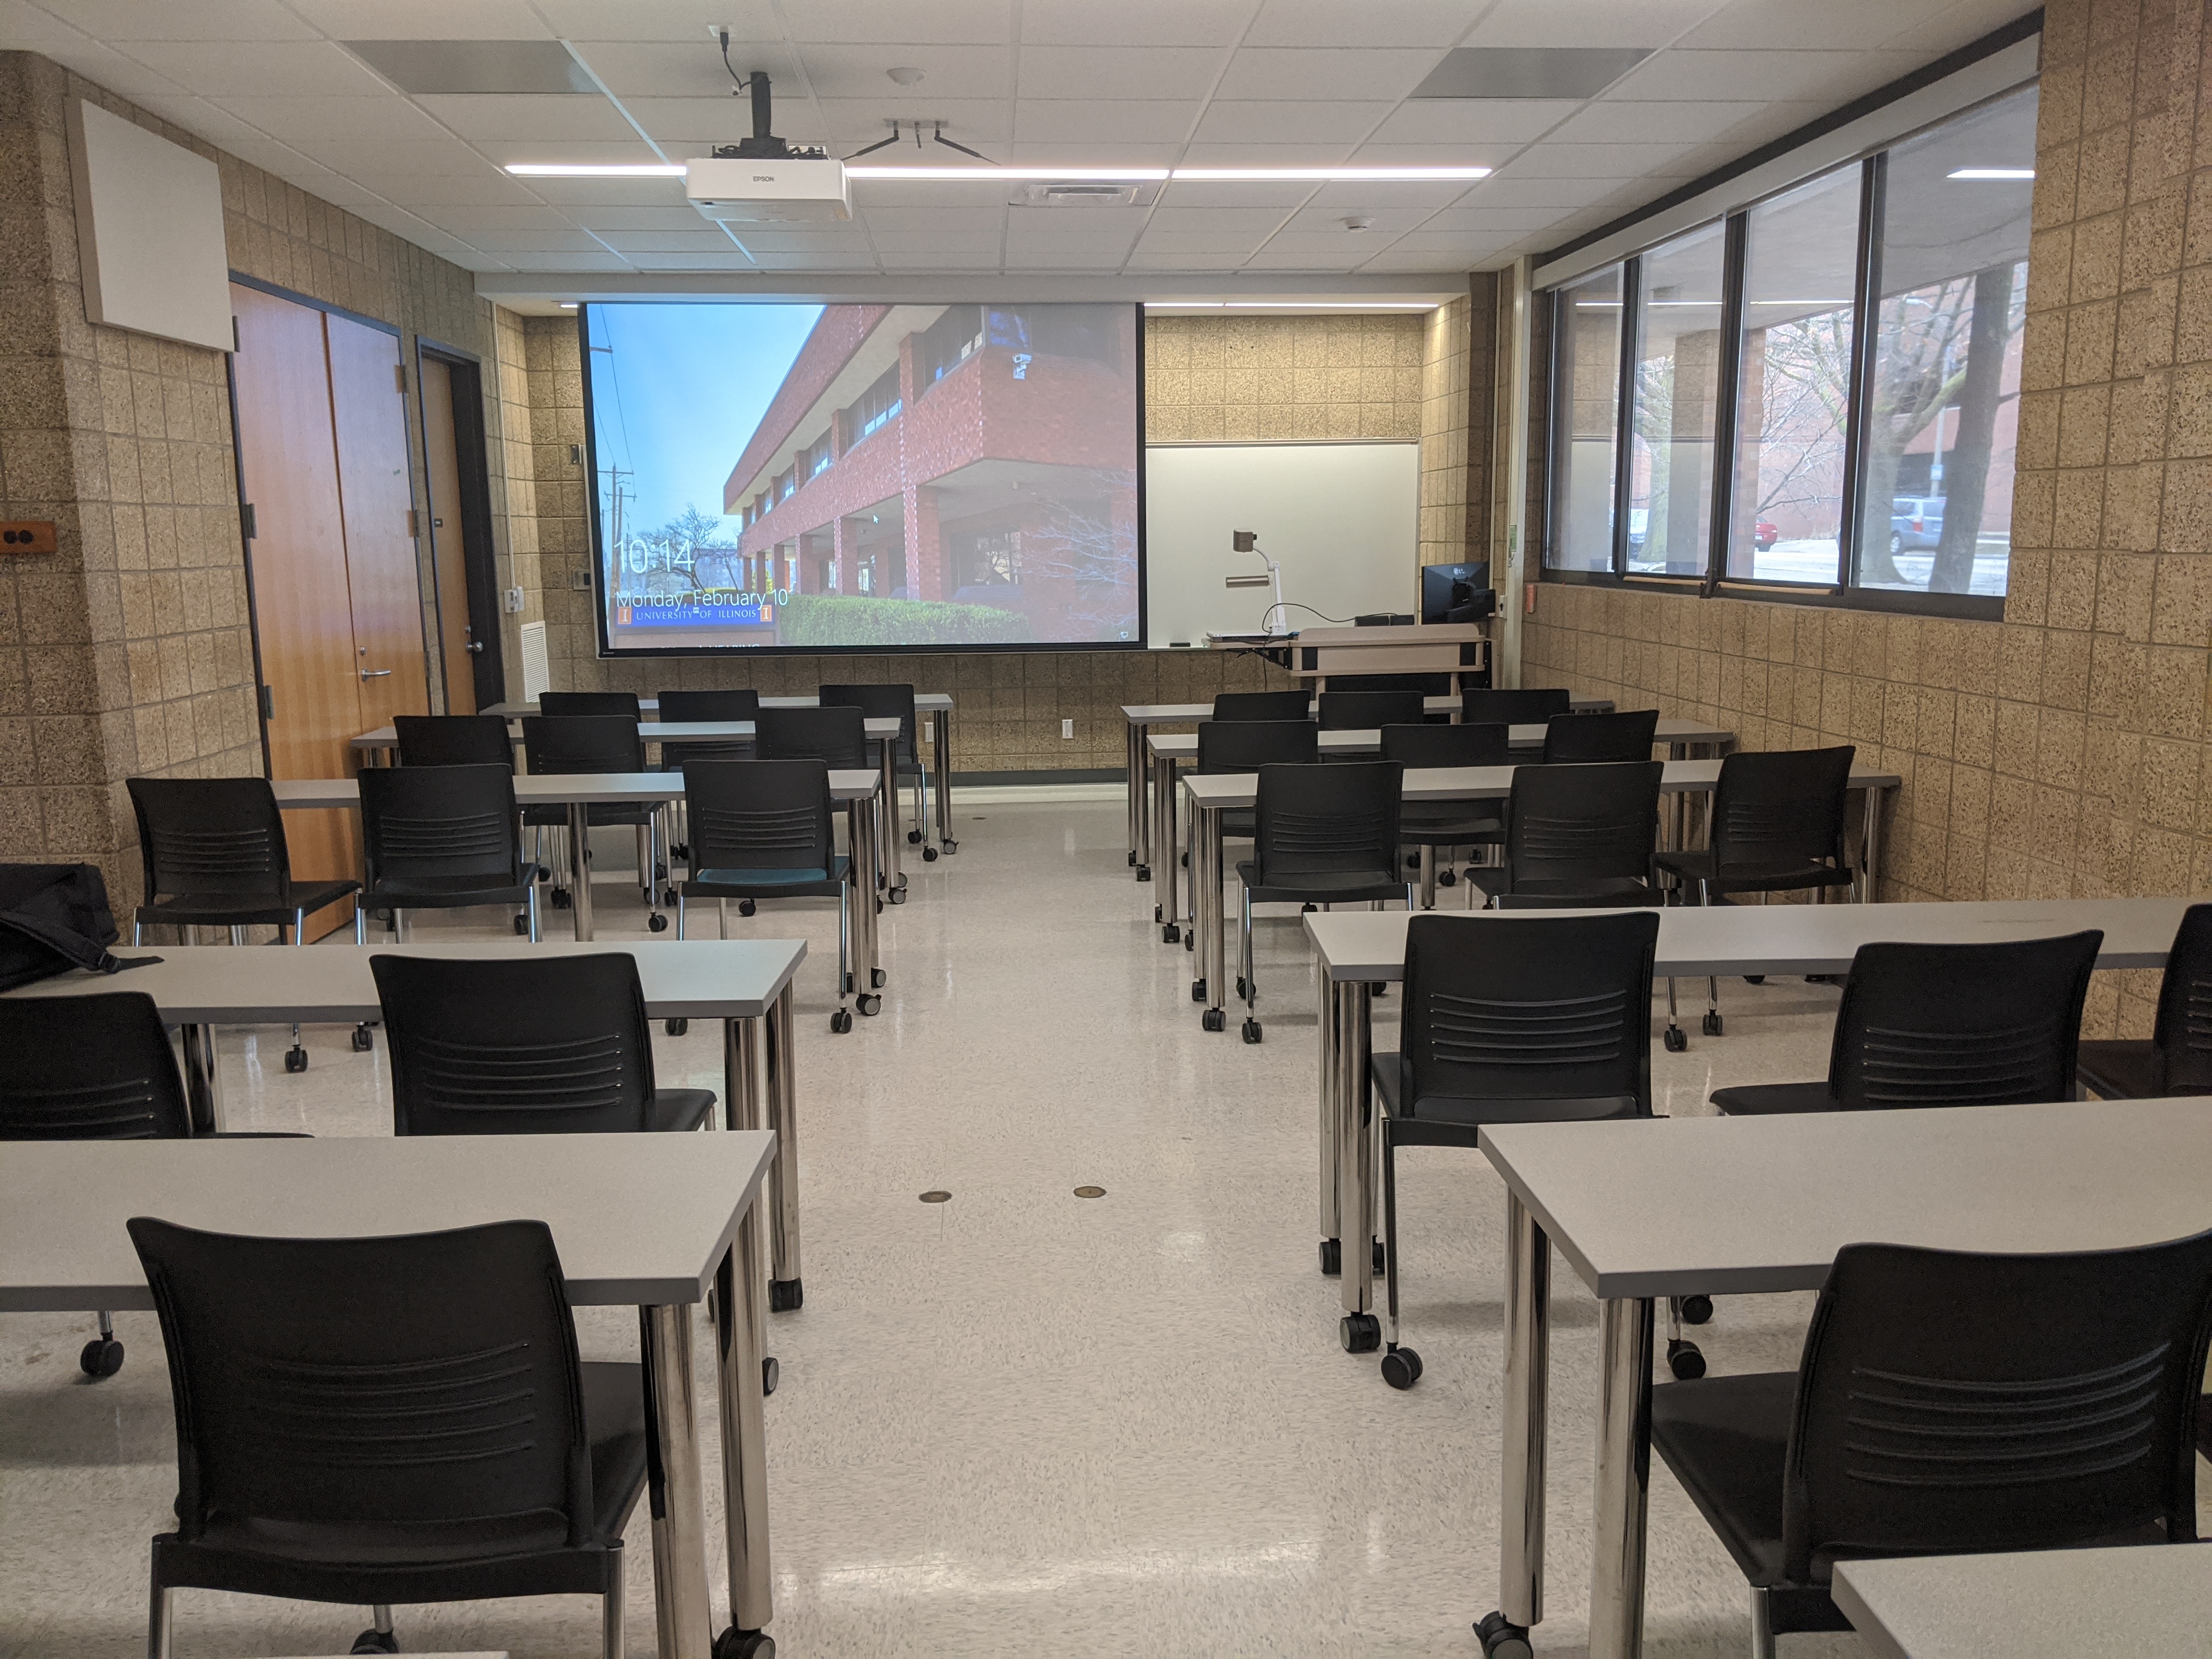 A view of the classroom with movable tables and chairs, a front instructor lectern, projection screen, and white board.